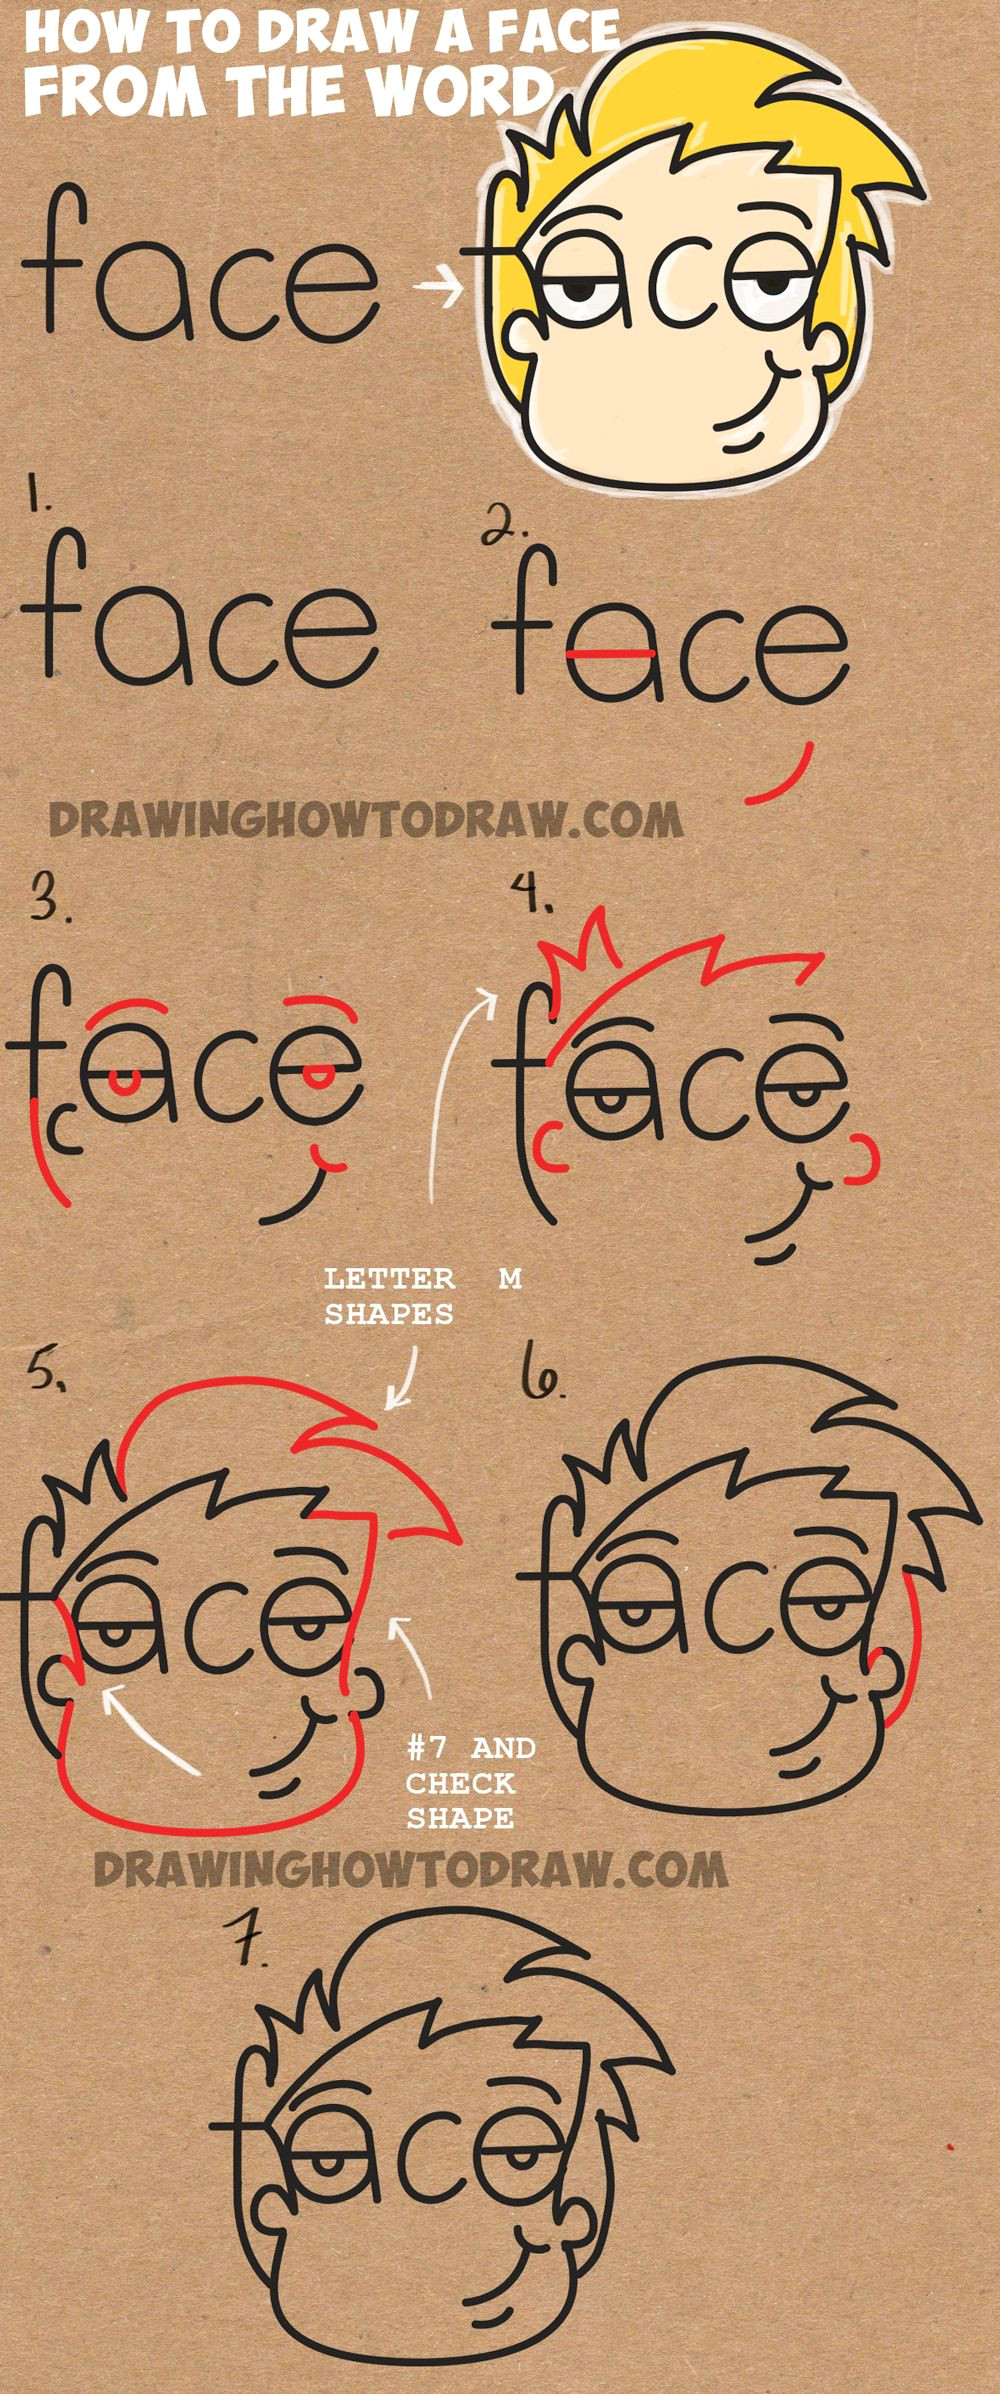 Easy Word Drawings How to Draw Cartoon Faces From the Word Face Easy Step by